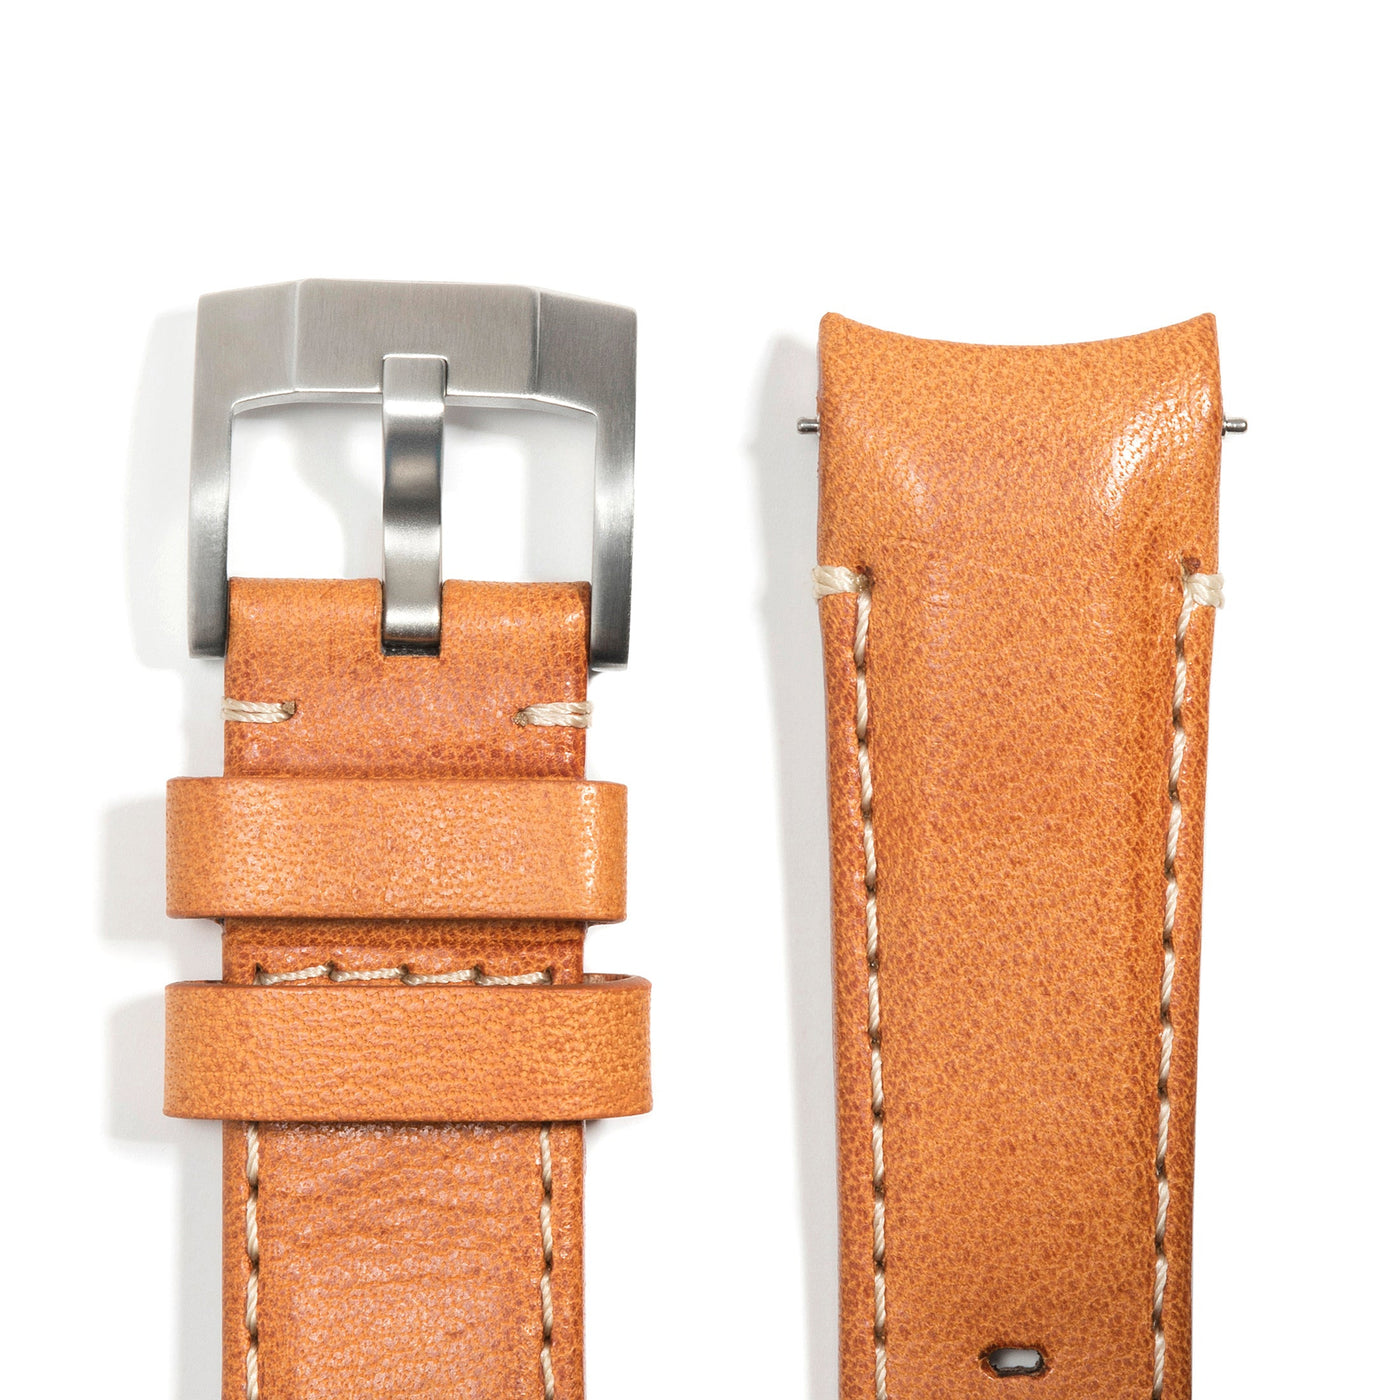 Tan Leather / Silver Buckle